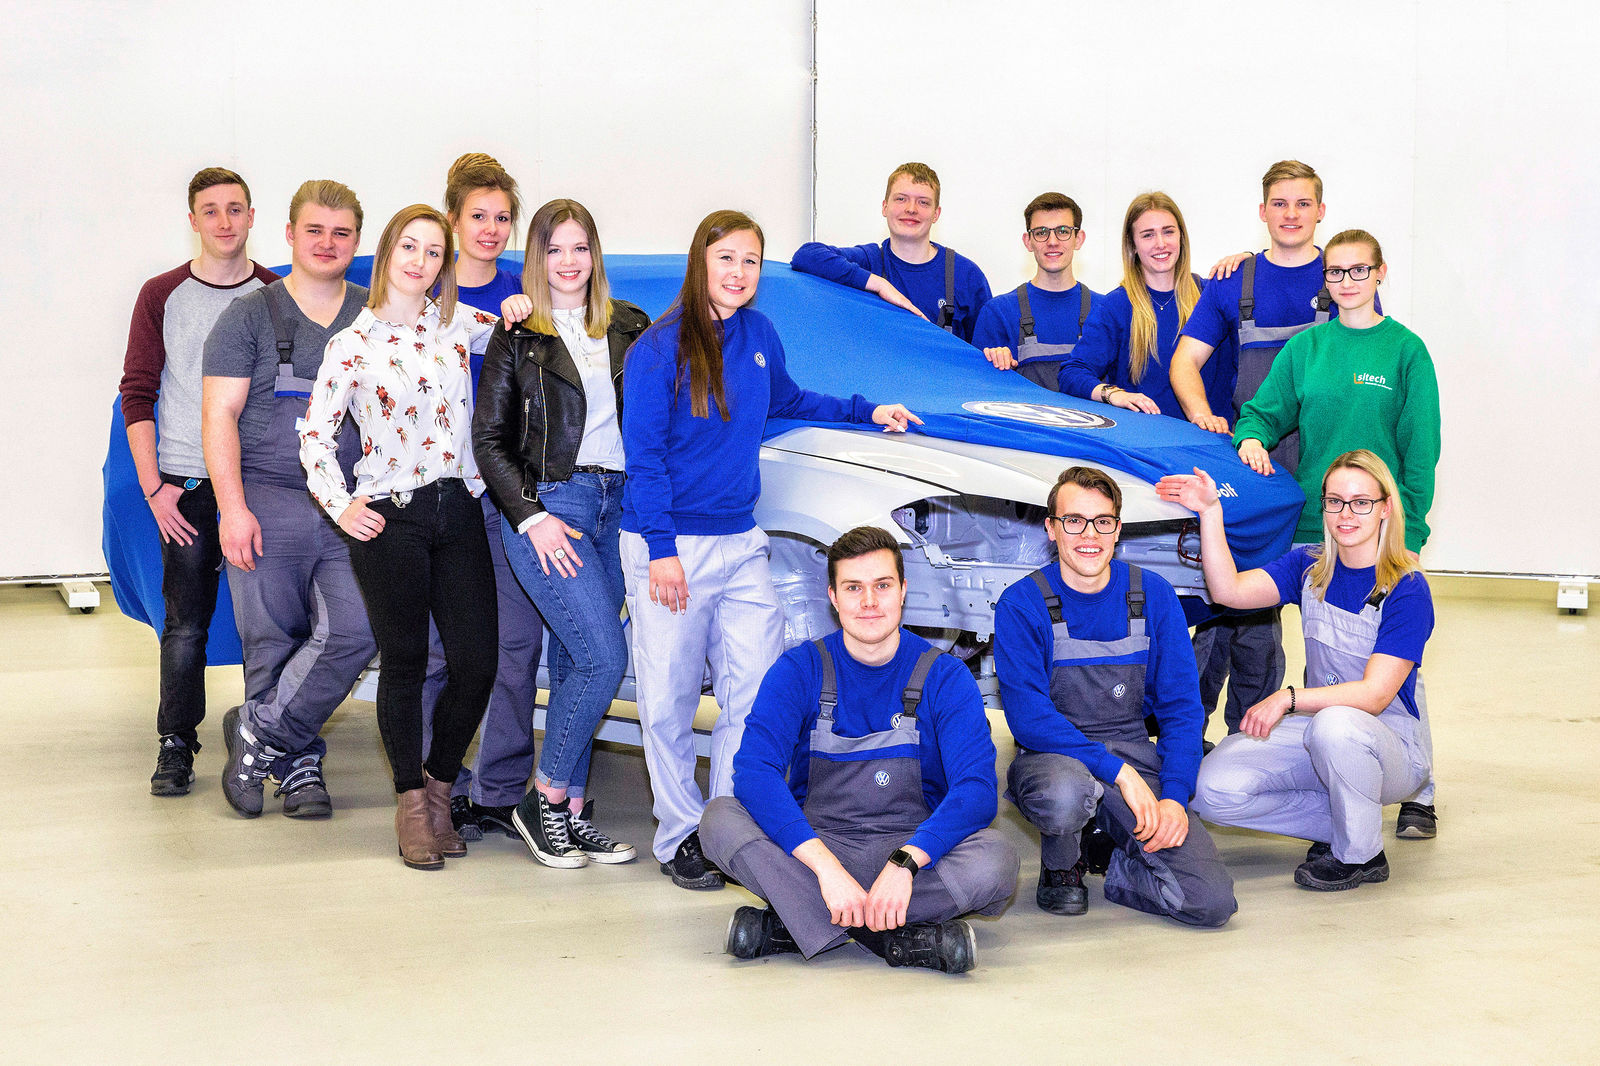 Second workshop visit on the way to the Wörthersee: Apprentices reveal – Wörthersee GTI 2018 will appear at GTI meeting with White Silver metallic paintwork